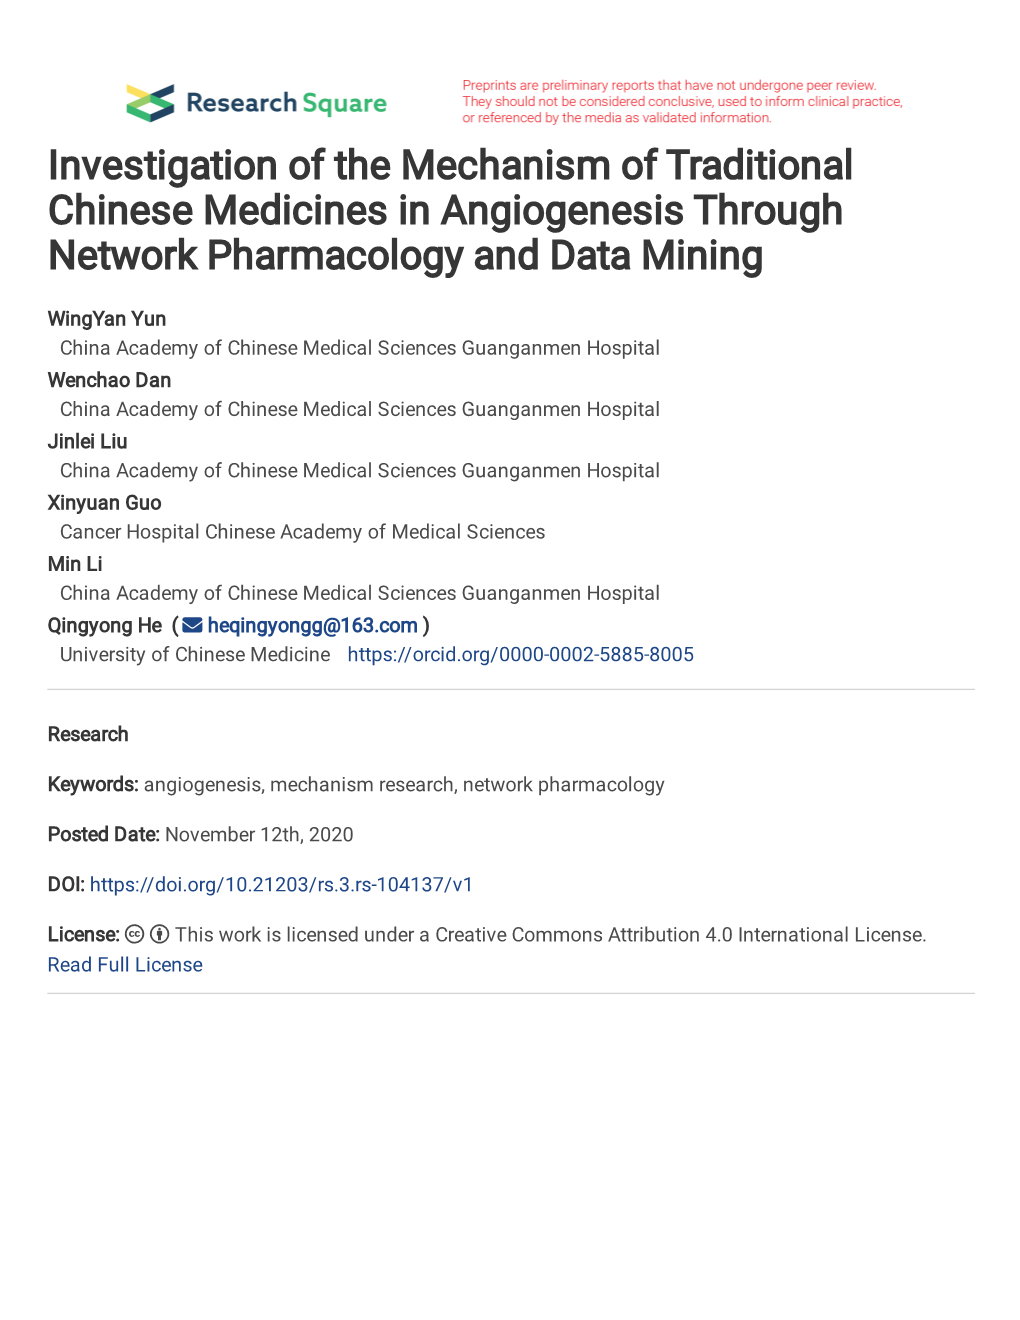 Investigation of the Mechanism of Traditional Chinese Medicines in Angiogenesis Through Network Pharmacology and Data Mining